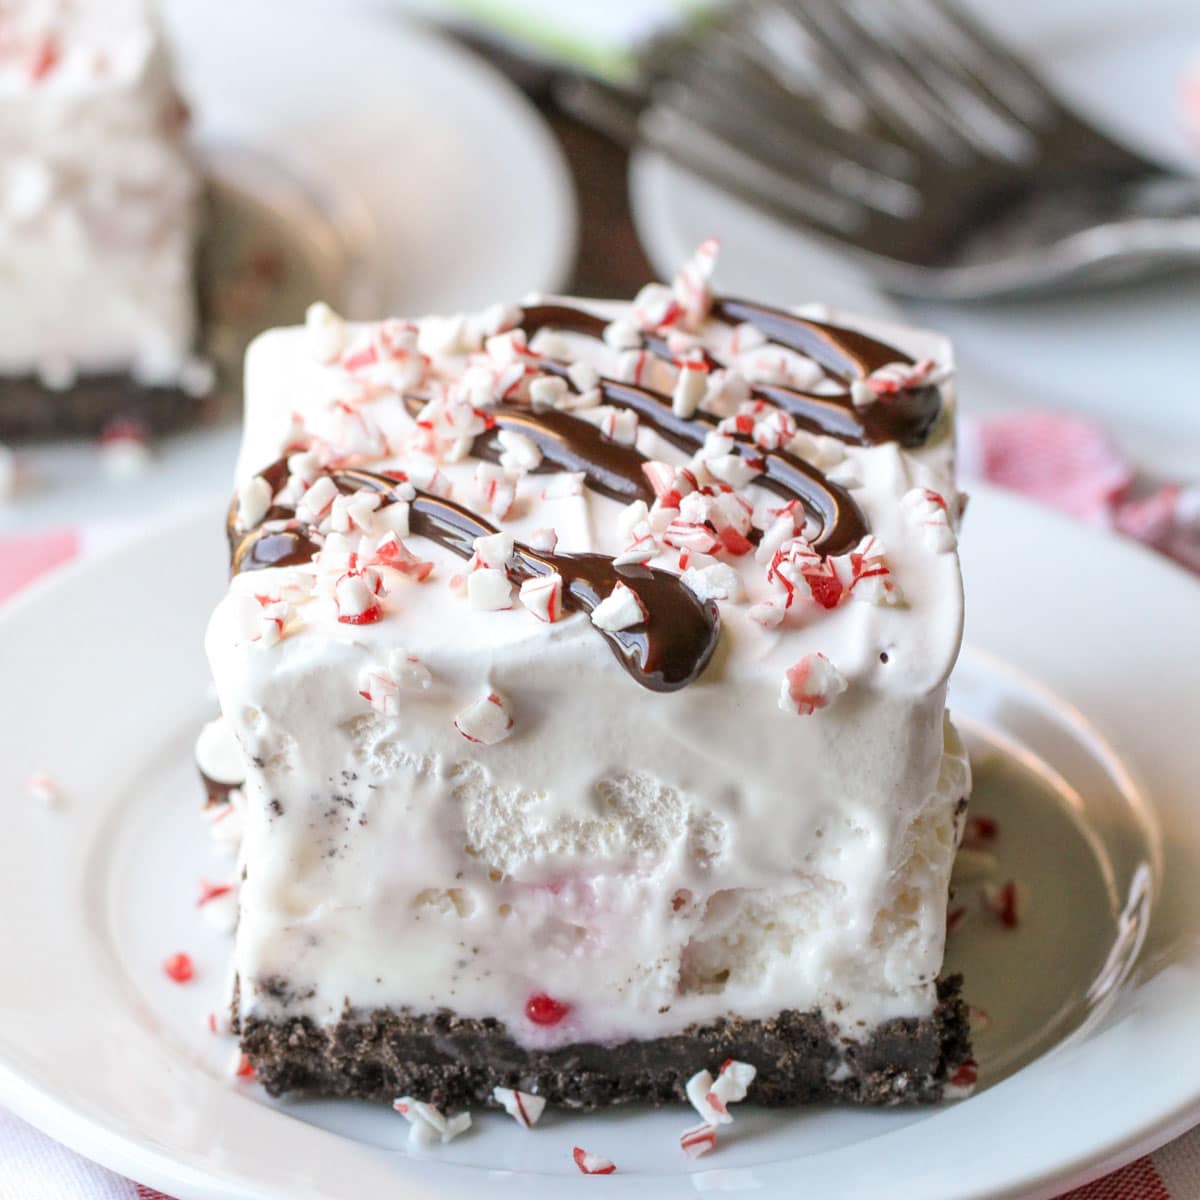 Christmas desserts - square slice of peppermint ice cream dessert drizzled with chocolate sauce.